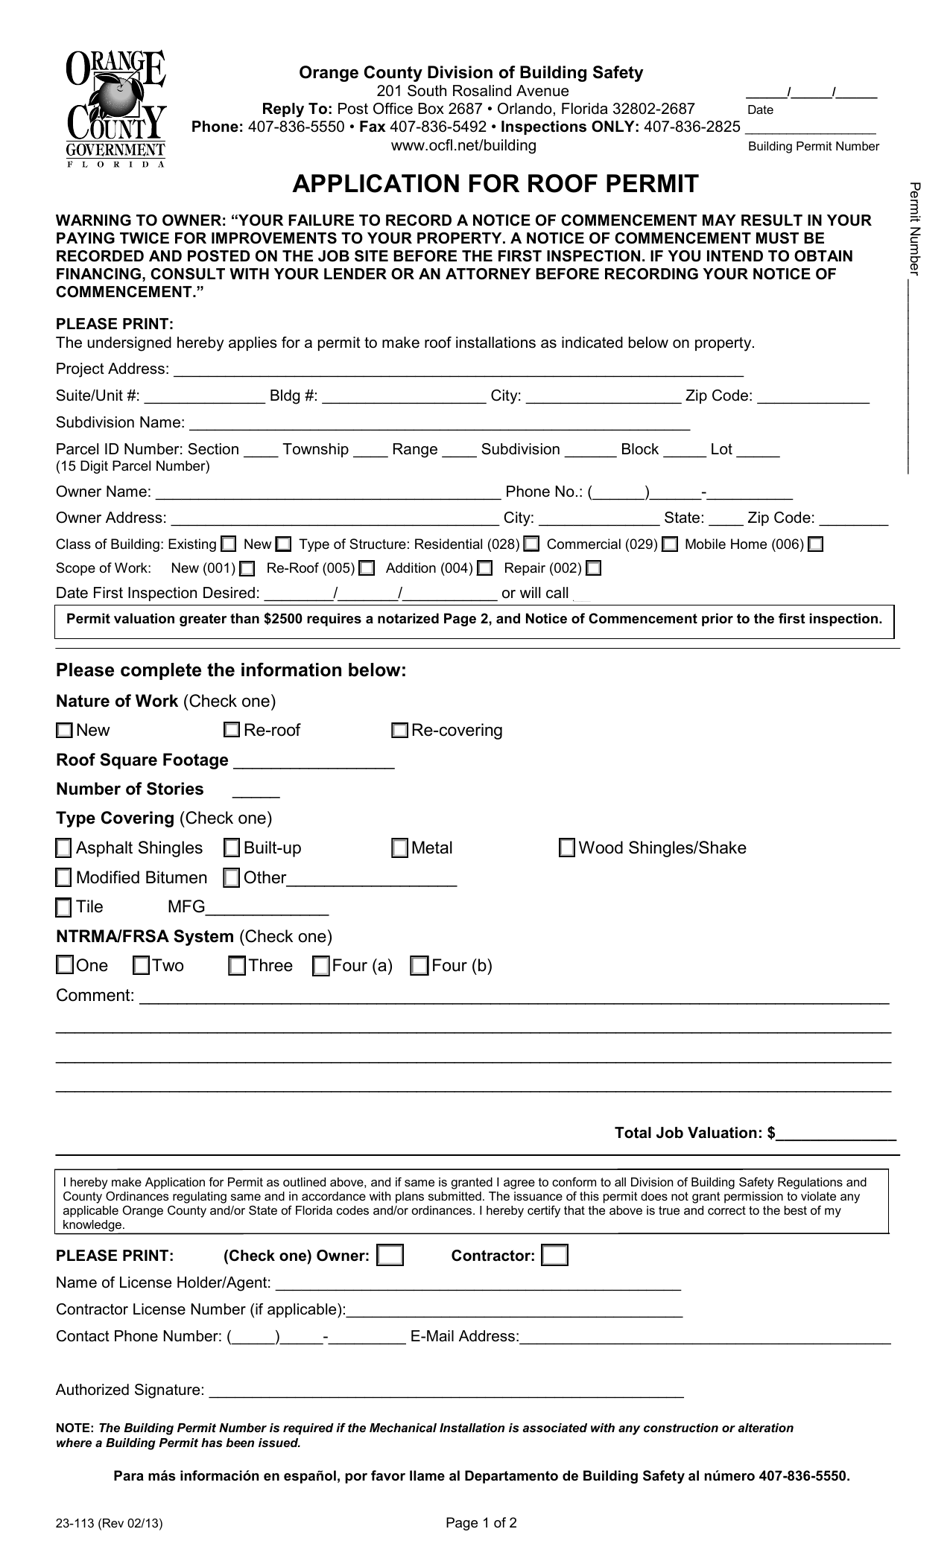 Form 23-113 Application for Roof Permit - Orange County, Florida, Page 1